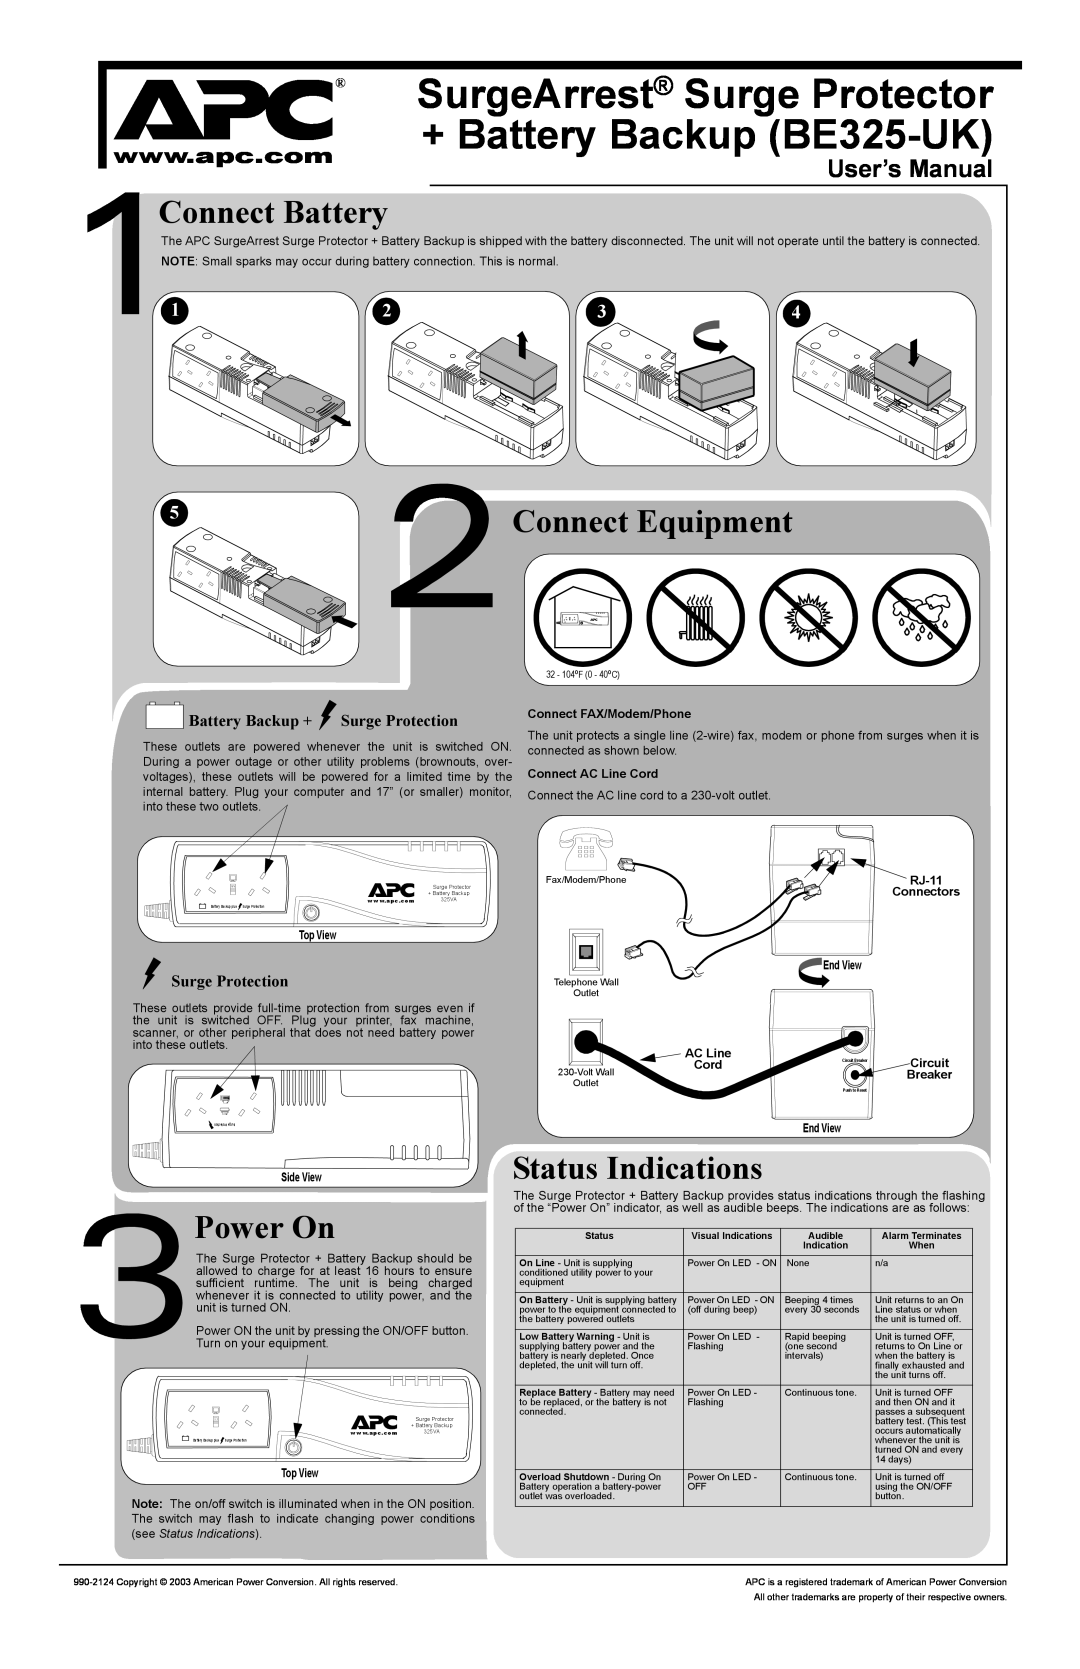 American Power Conversion user manual User’s Manual, SurgeArrest Surge Protector, + Battery Backup BE325-UK, Power On 